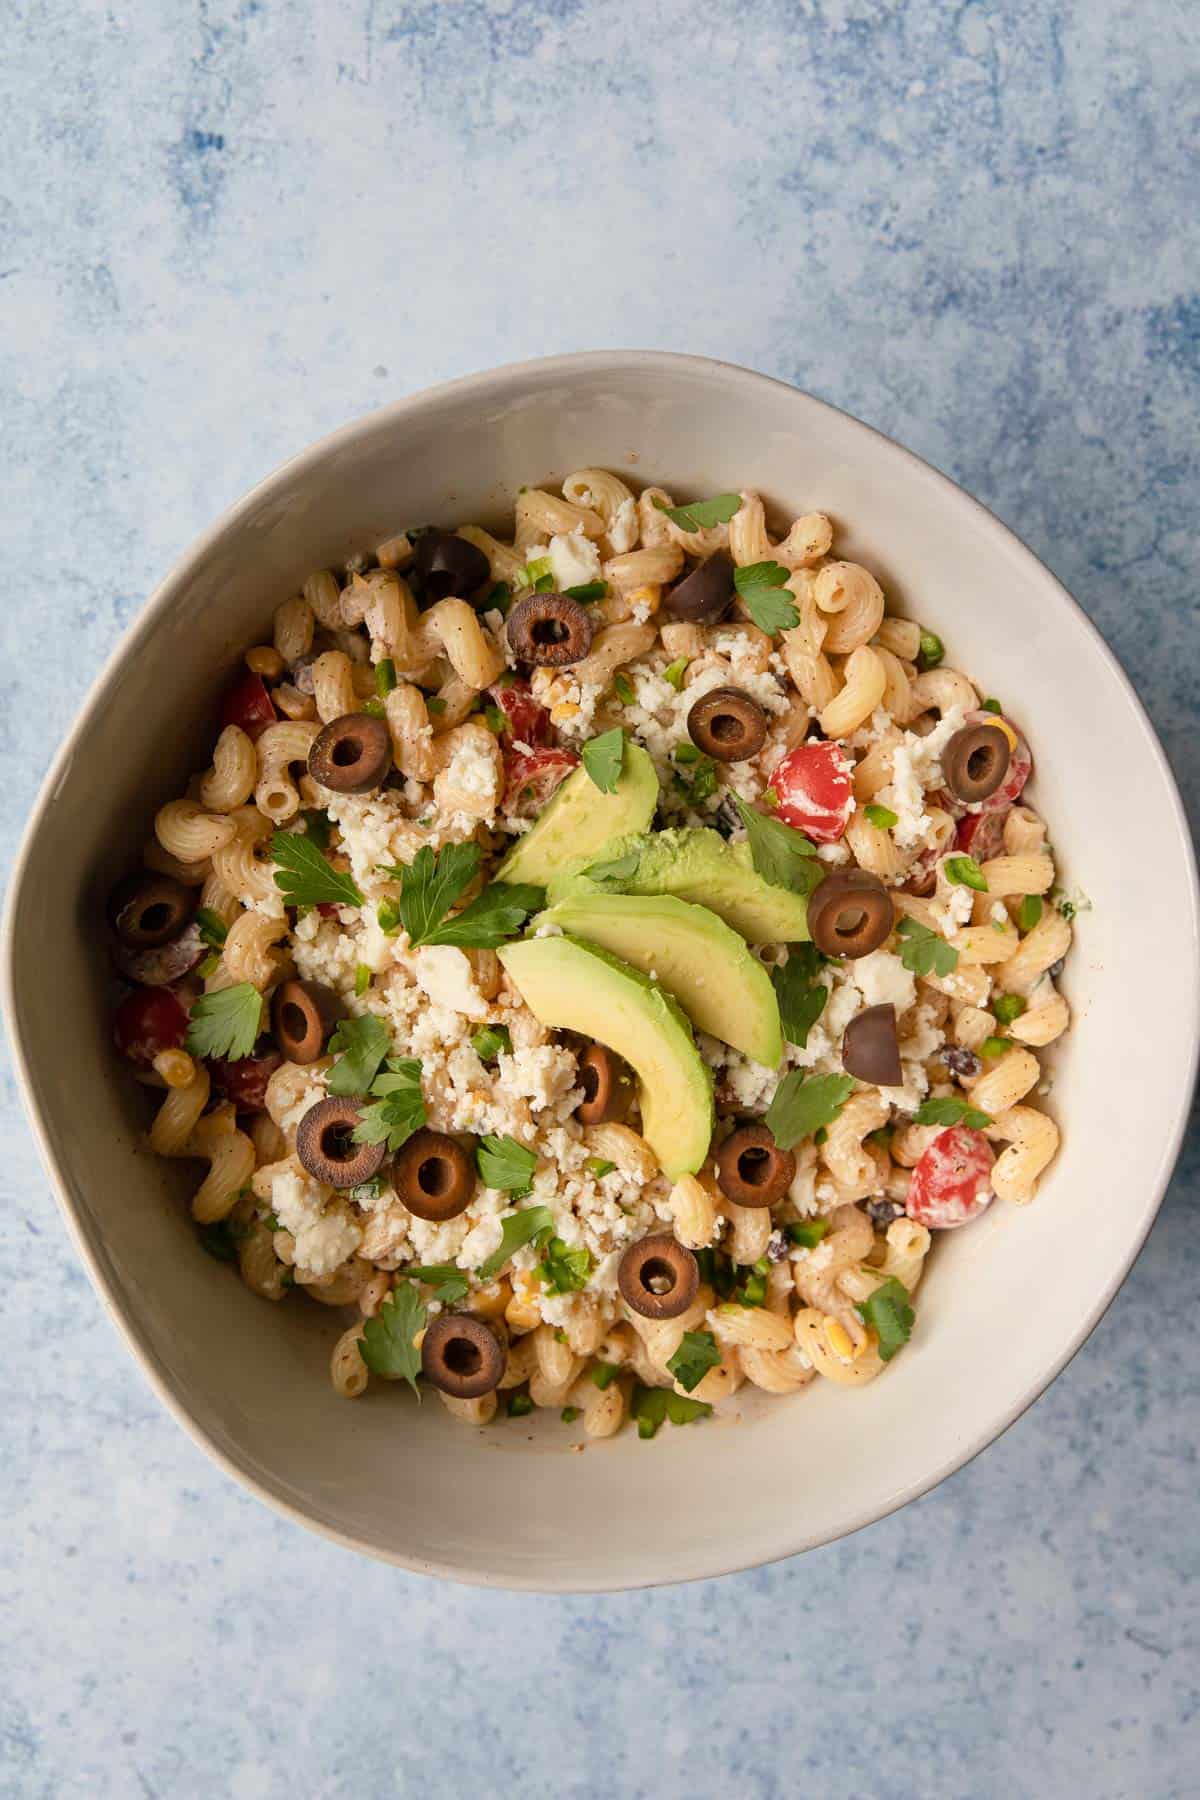 a bowl of pasta salad topped with sliced avocado